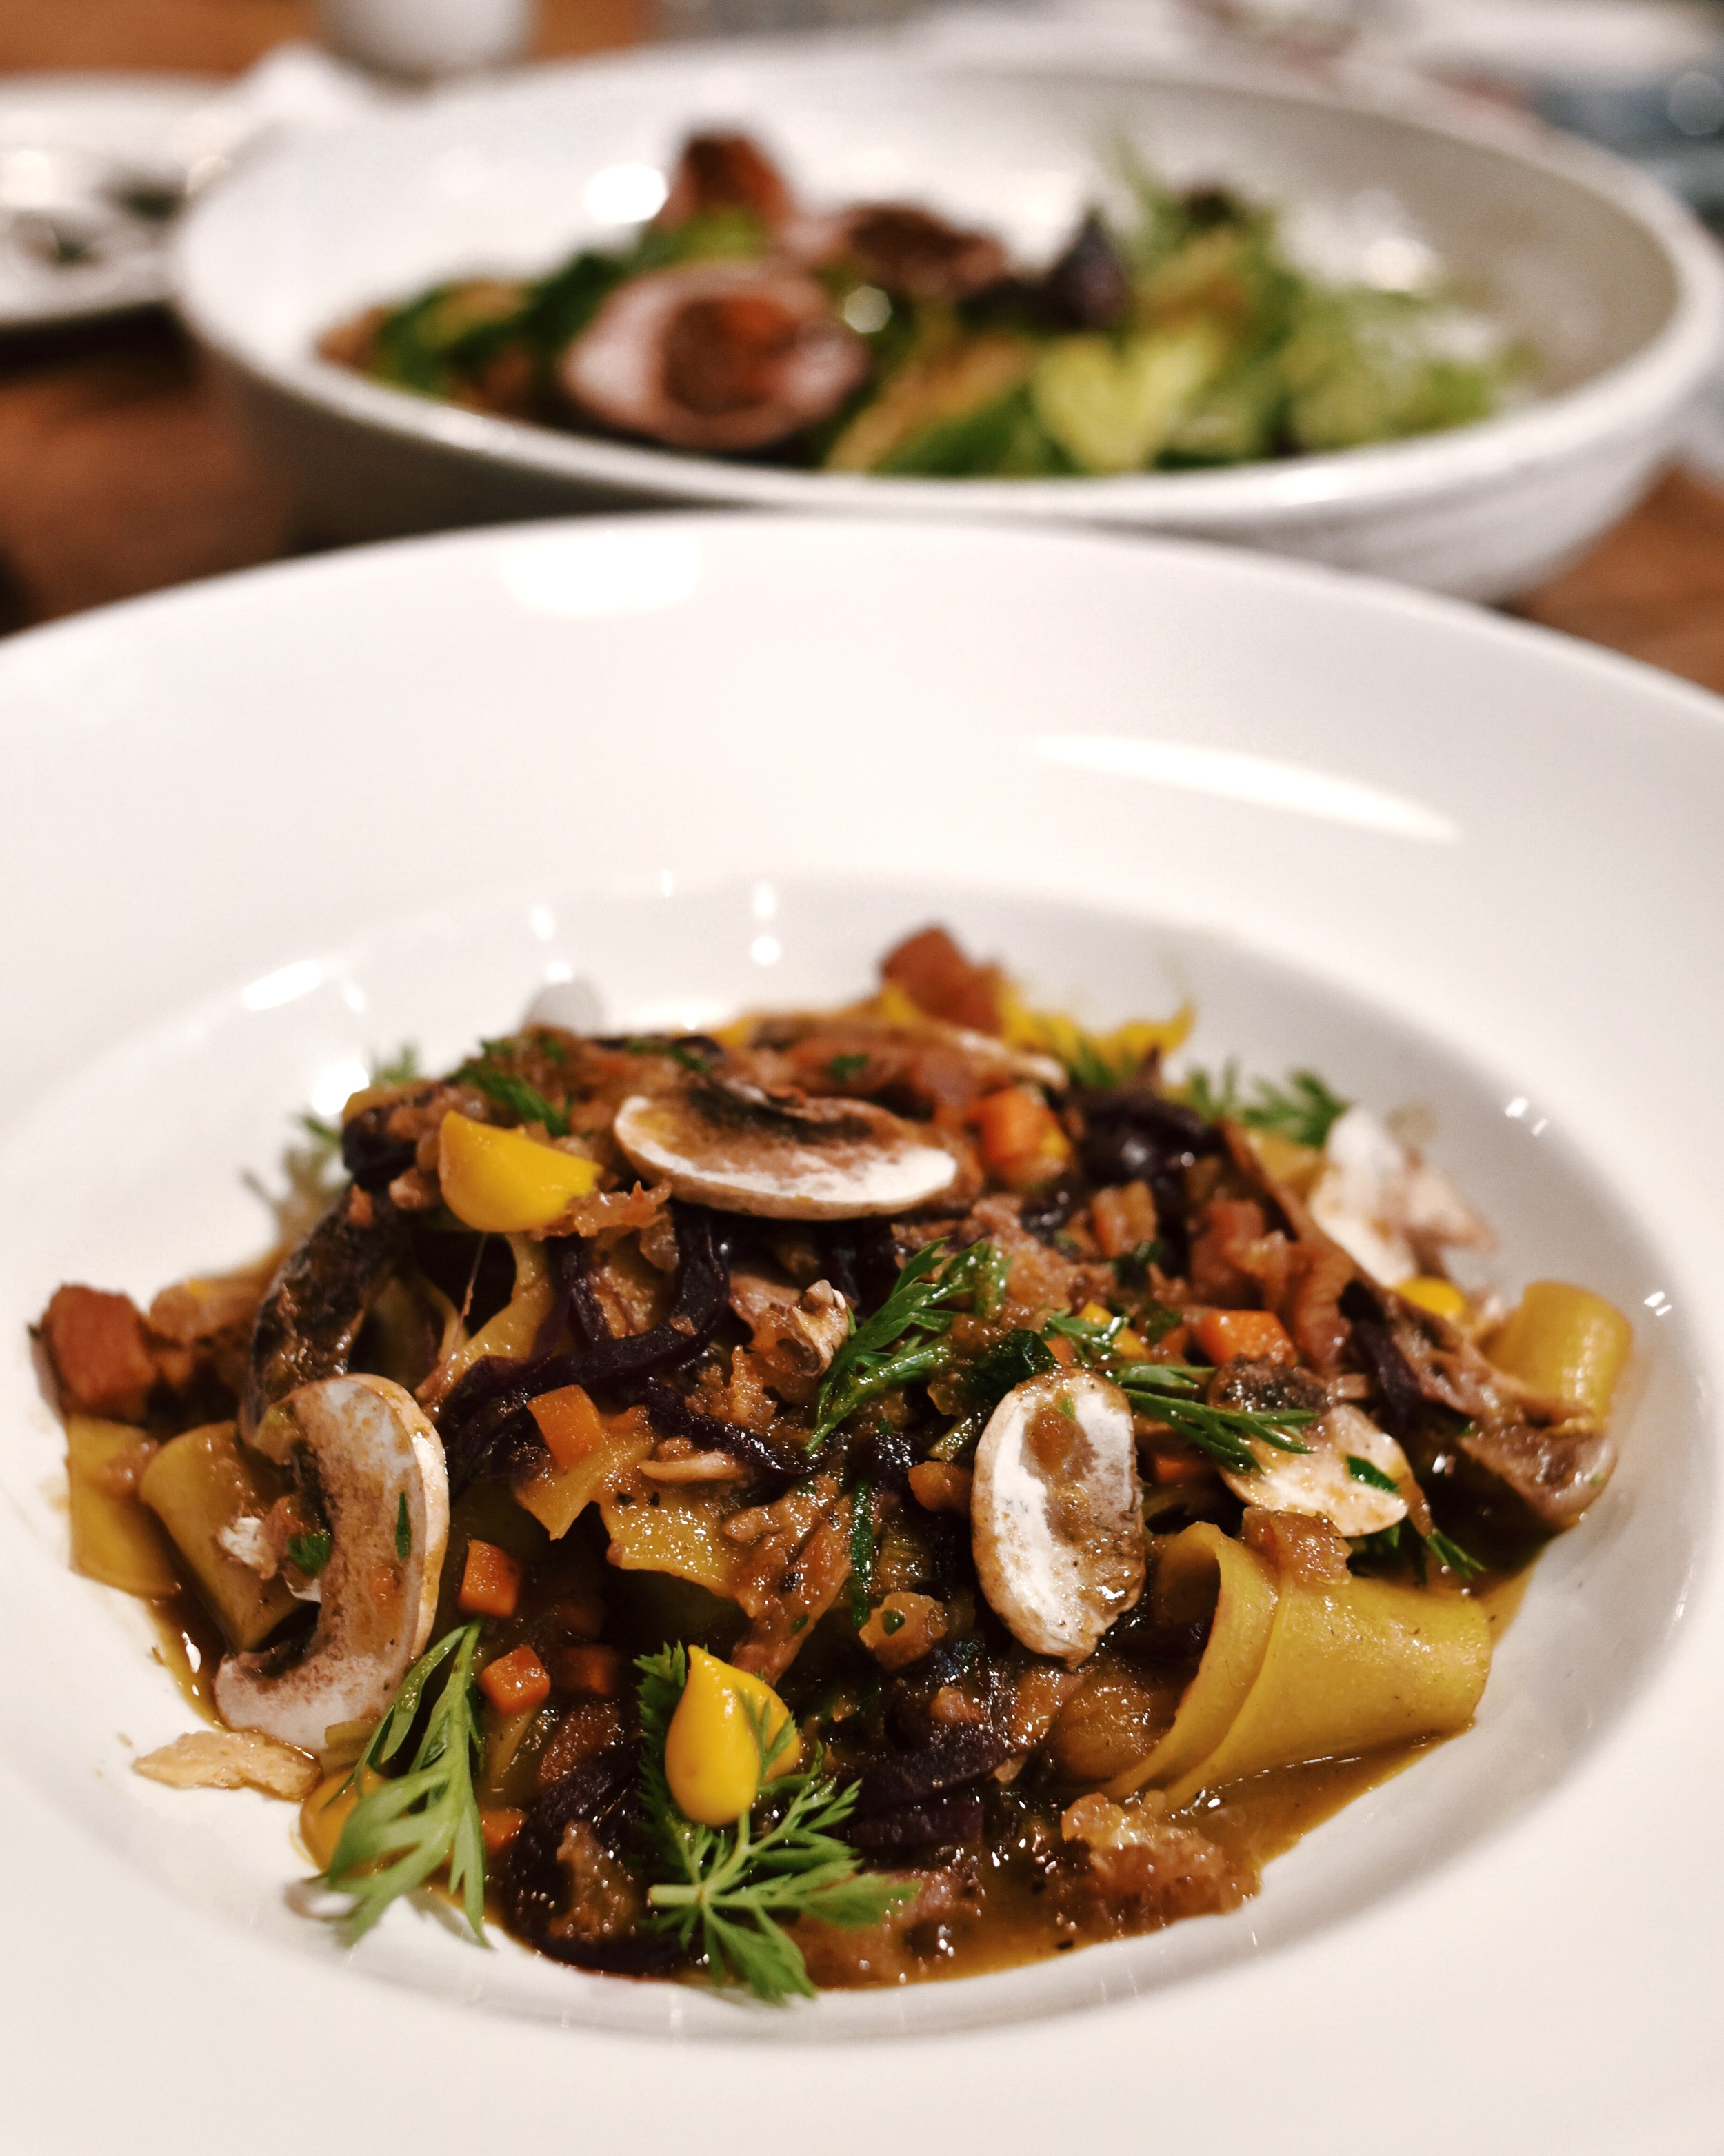 PAPPARDELLE ALA COQ AU VIN,  j. ludovico chickens braised in red wine, smoked bacon, chicken cracklings, carrots cooked in their own juices, champignon mushrooms